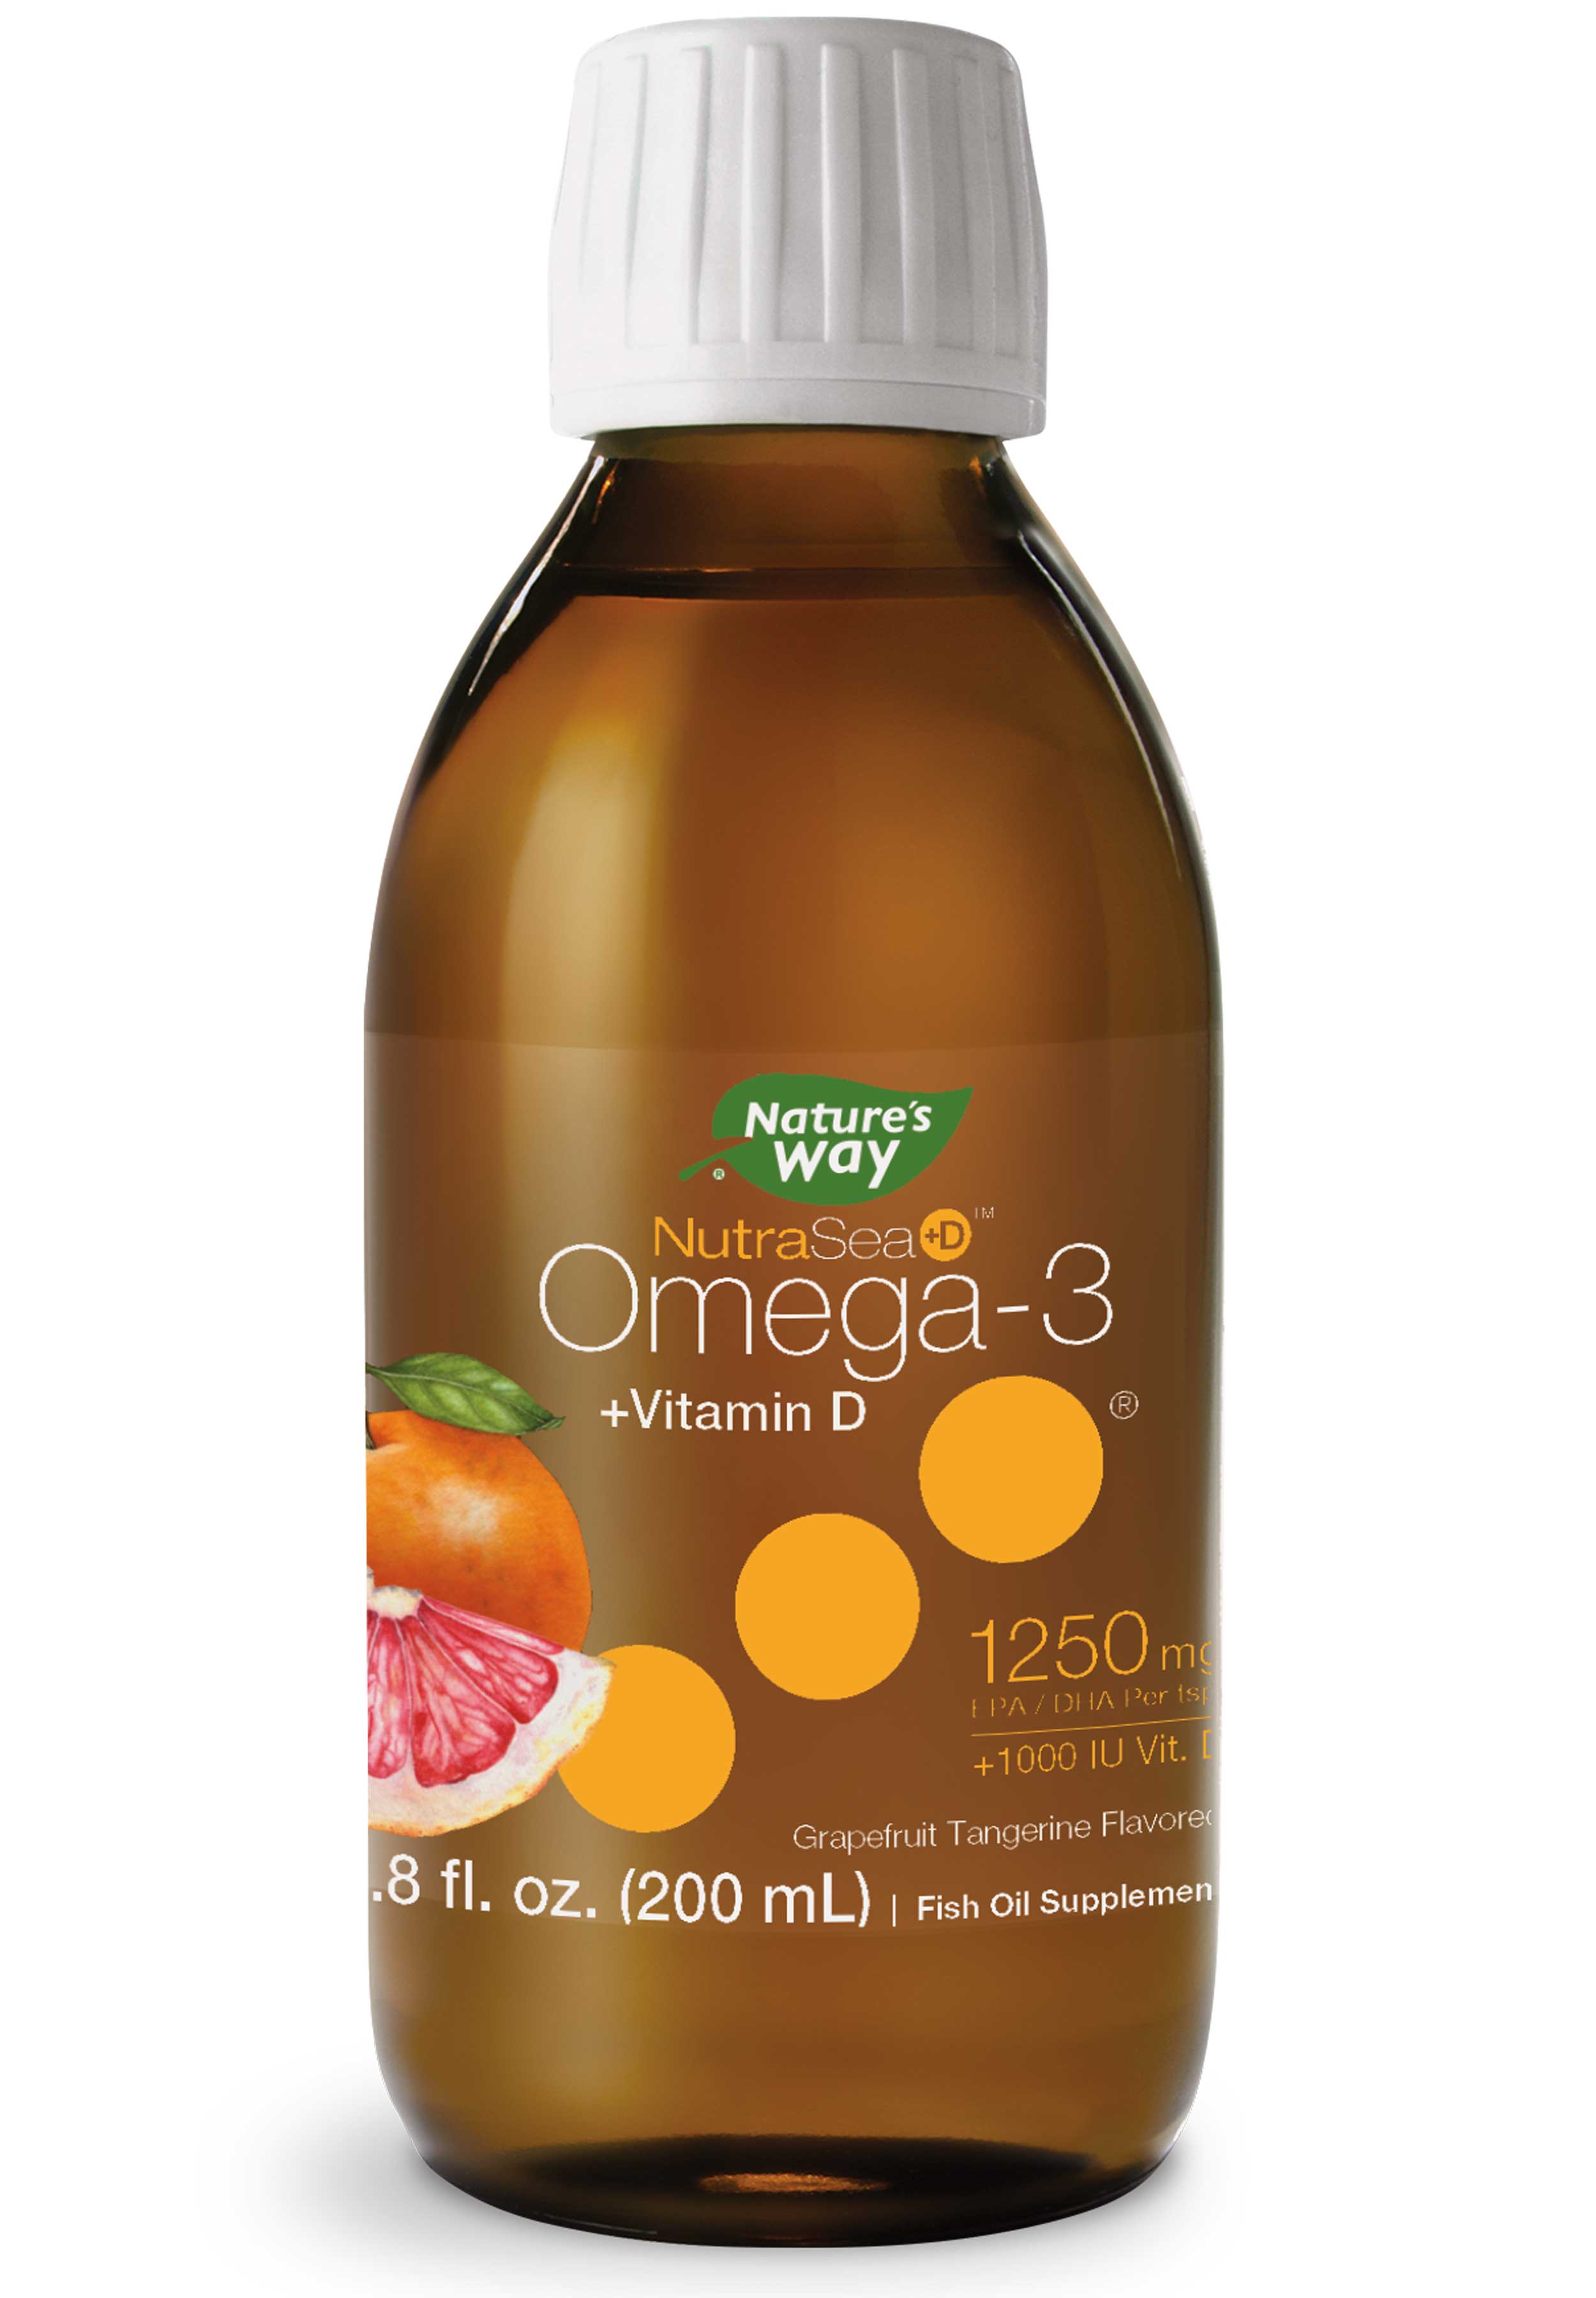 Nature's Way NutraSea +D Omega-3